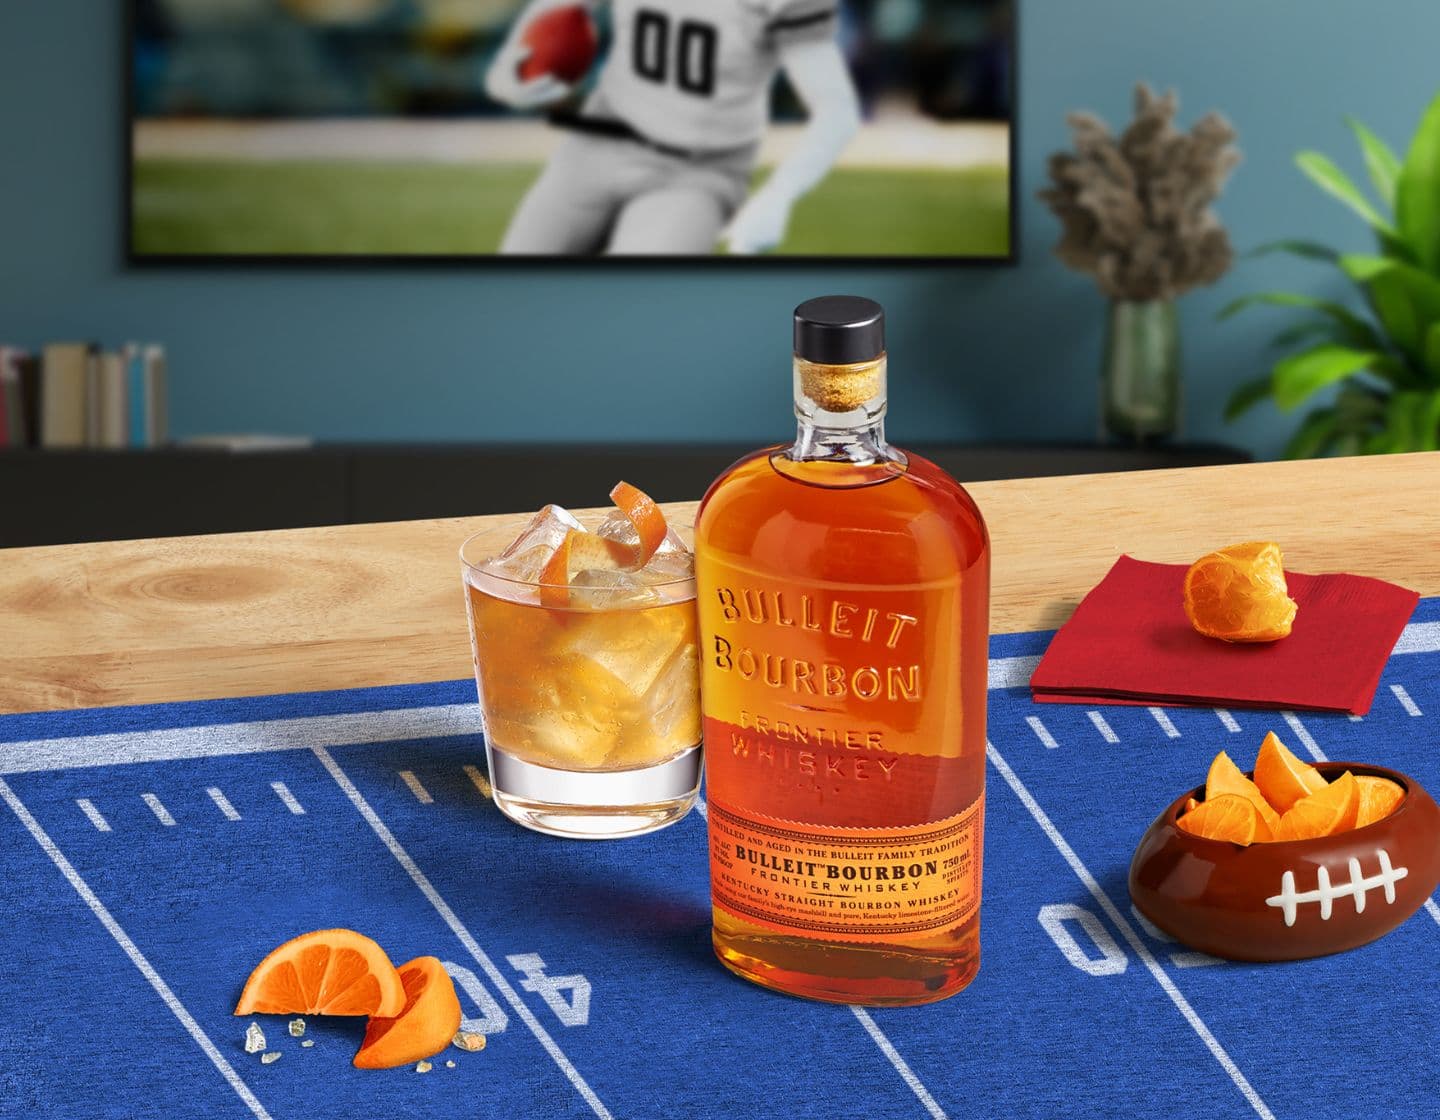 Bulleit_Bourbon_bottle_with_tumblr_glass_of_american_whiskey_and_oranges_on_table_with_sports_tv_in_background